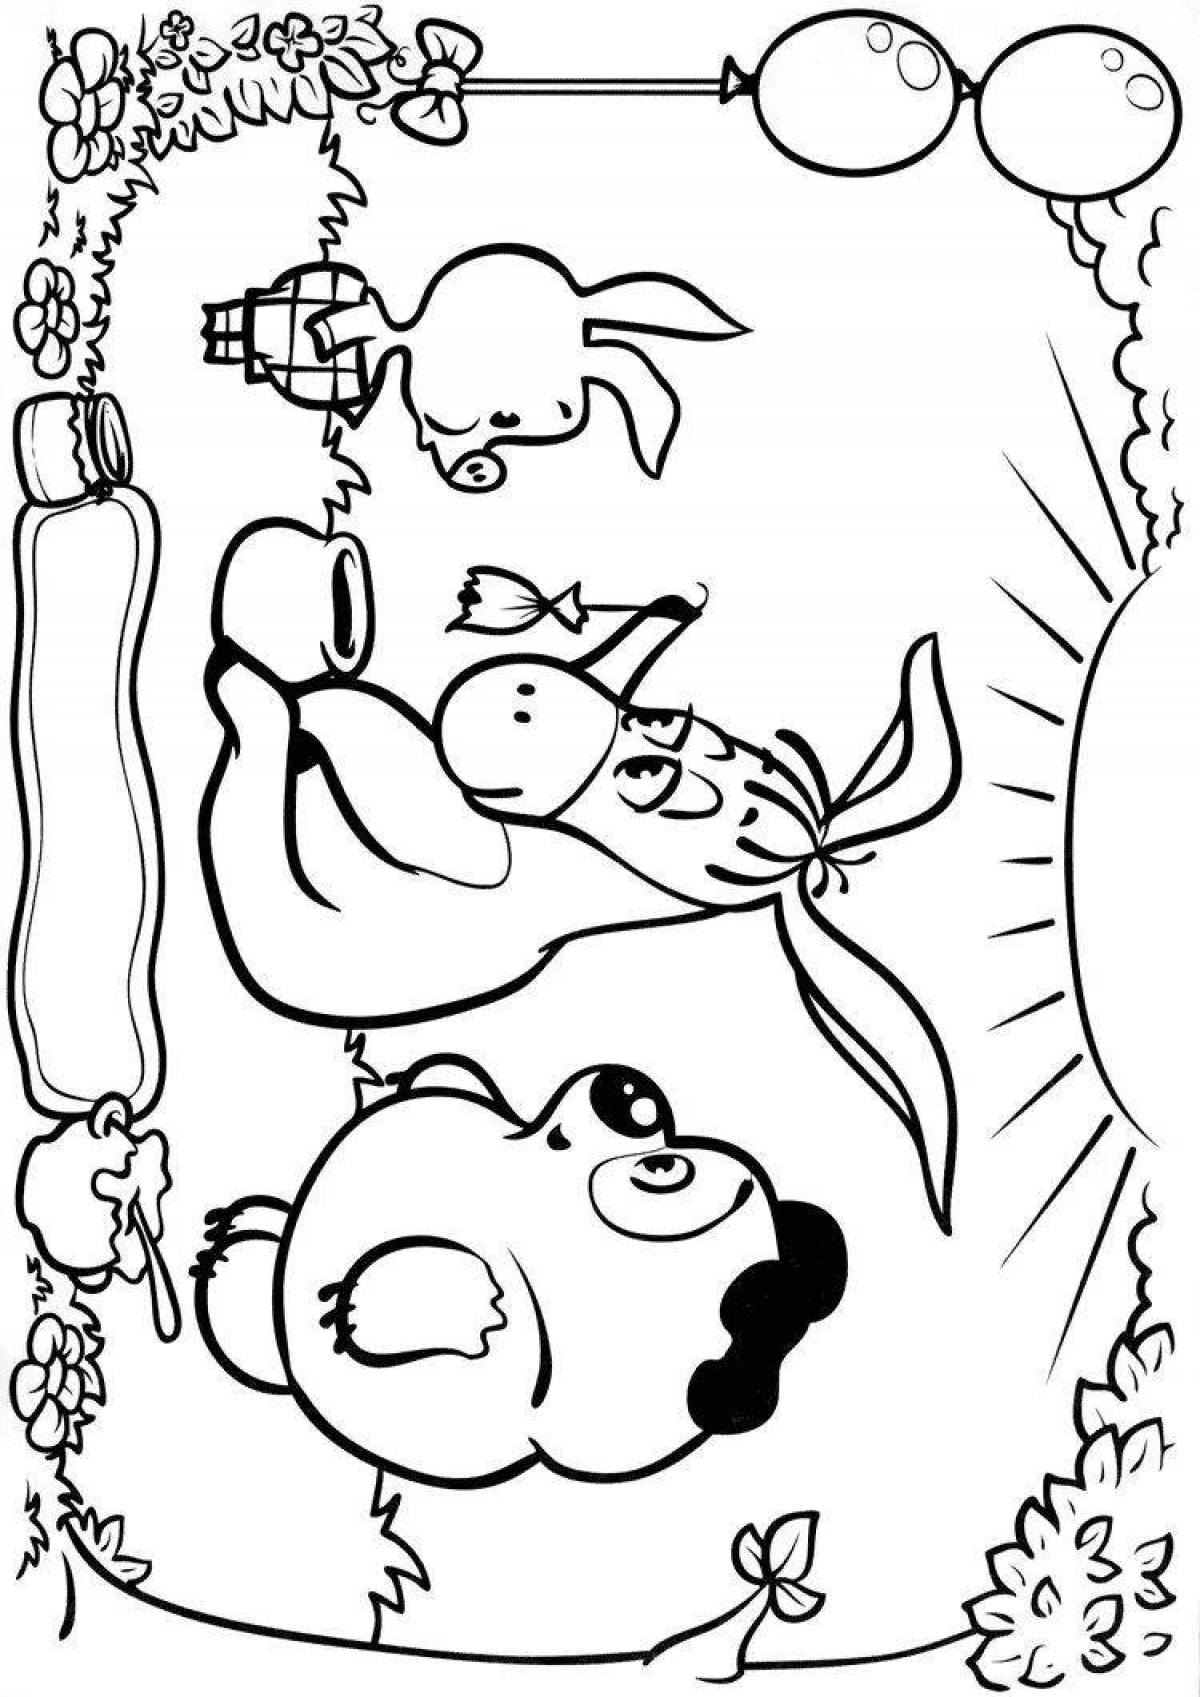 Coloring page charming Piglet and winnipoo